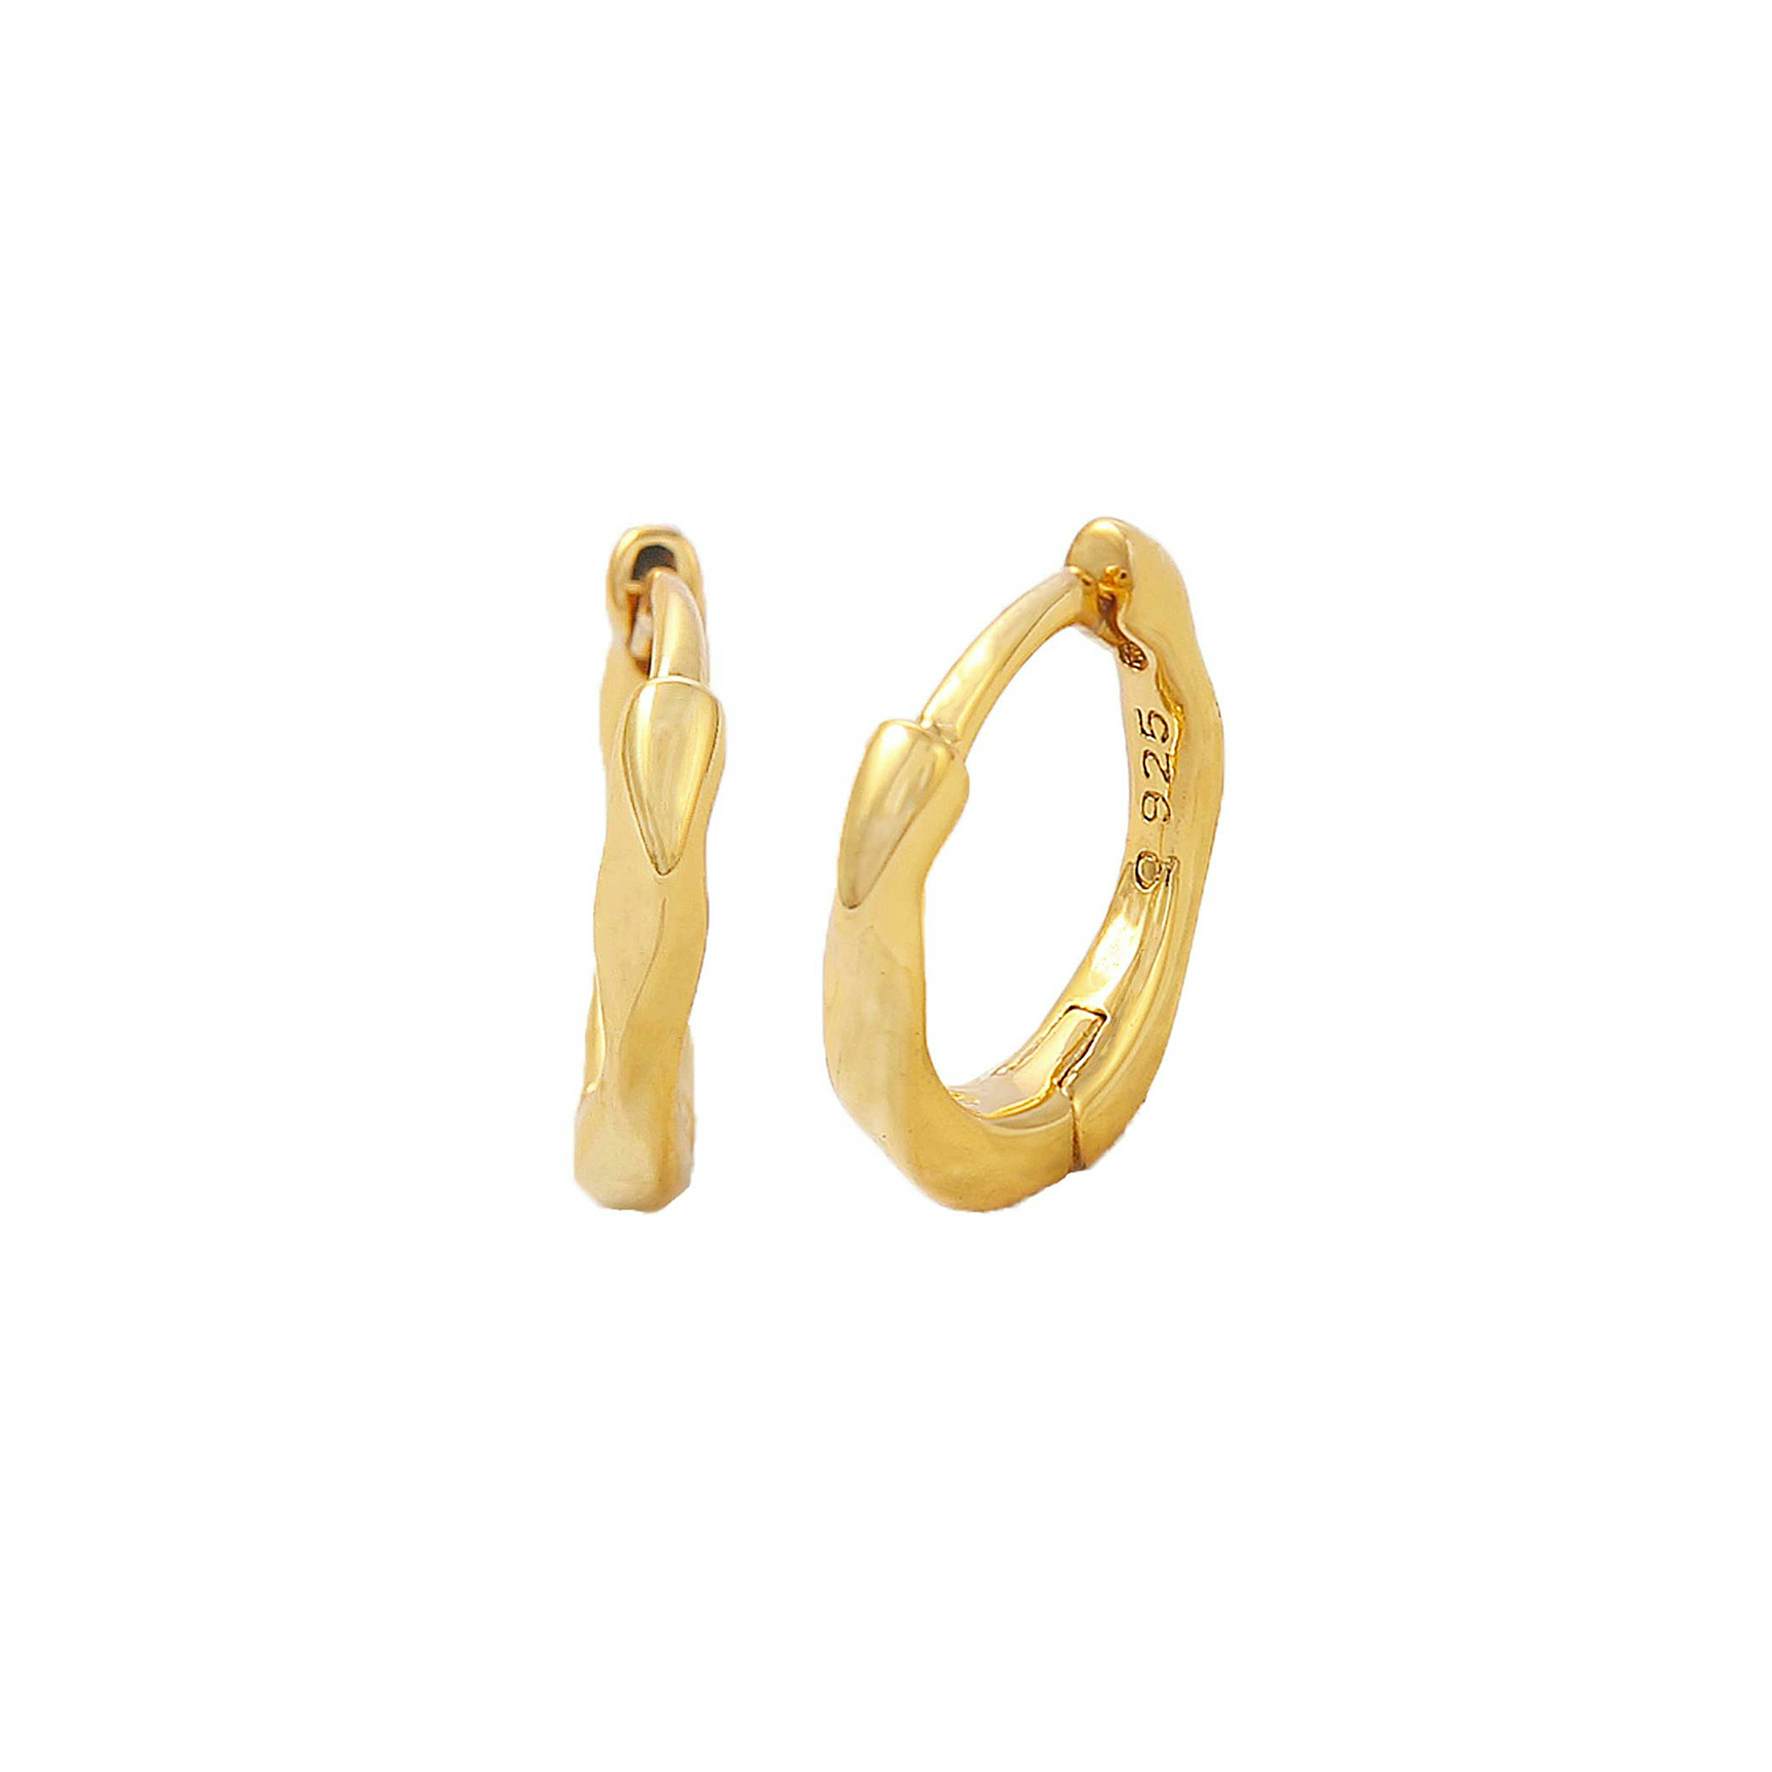 Apollo Hoops from Hultquist Copenhagen in Goldplated-Silver Sterling 925